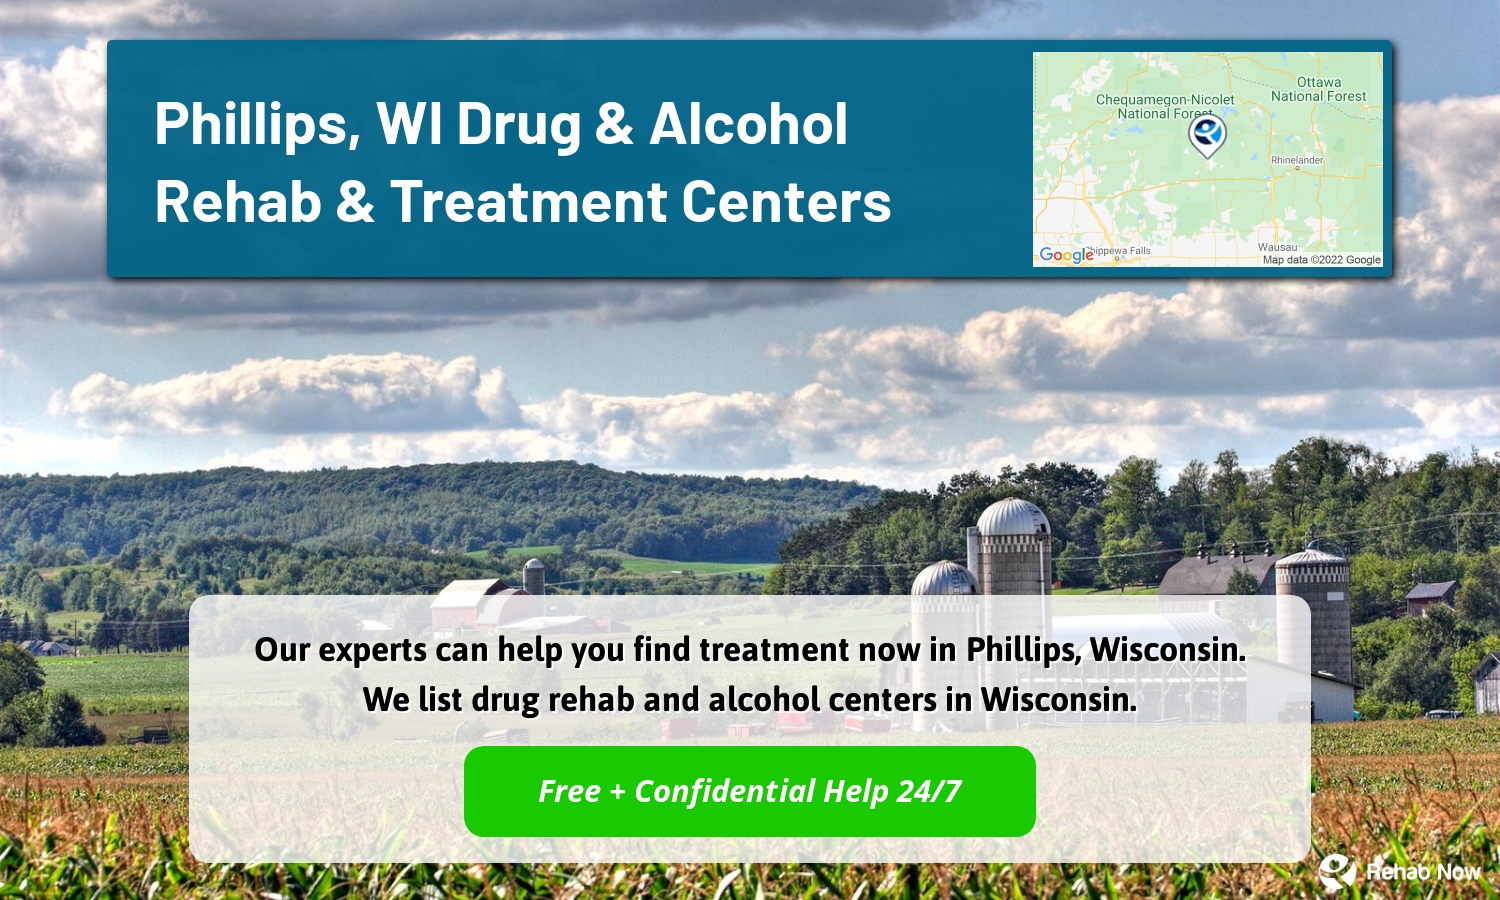 Our experts can help you find treatment now in Phillips, Wisconsin. We list drug rehab and alcohol centers in Wisconsin.